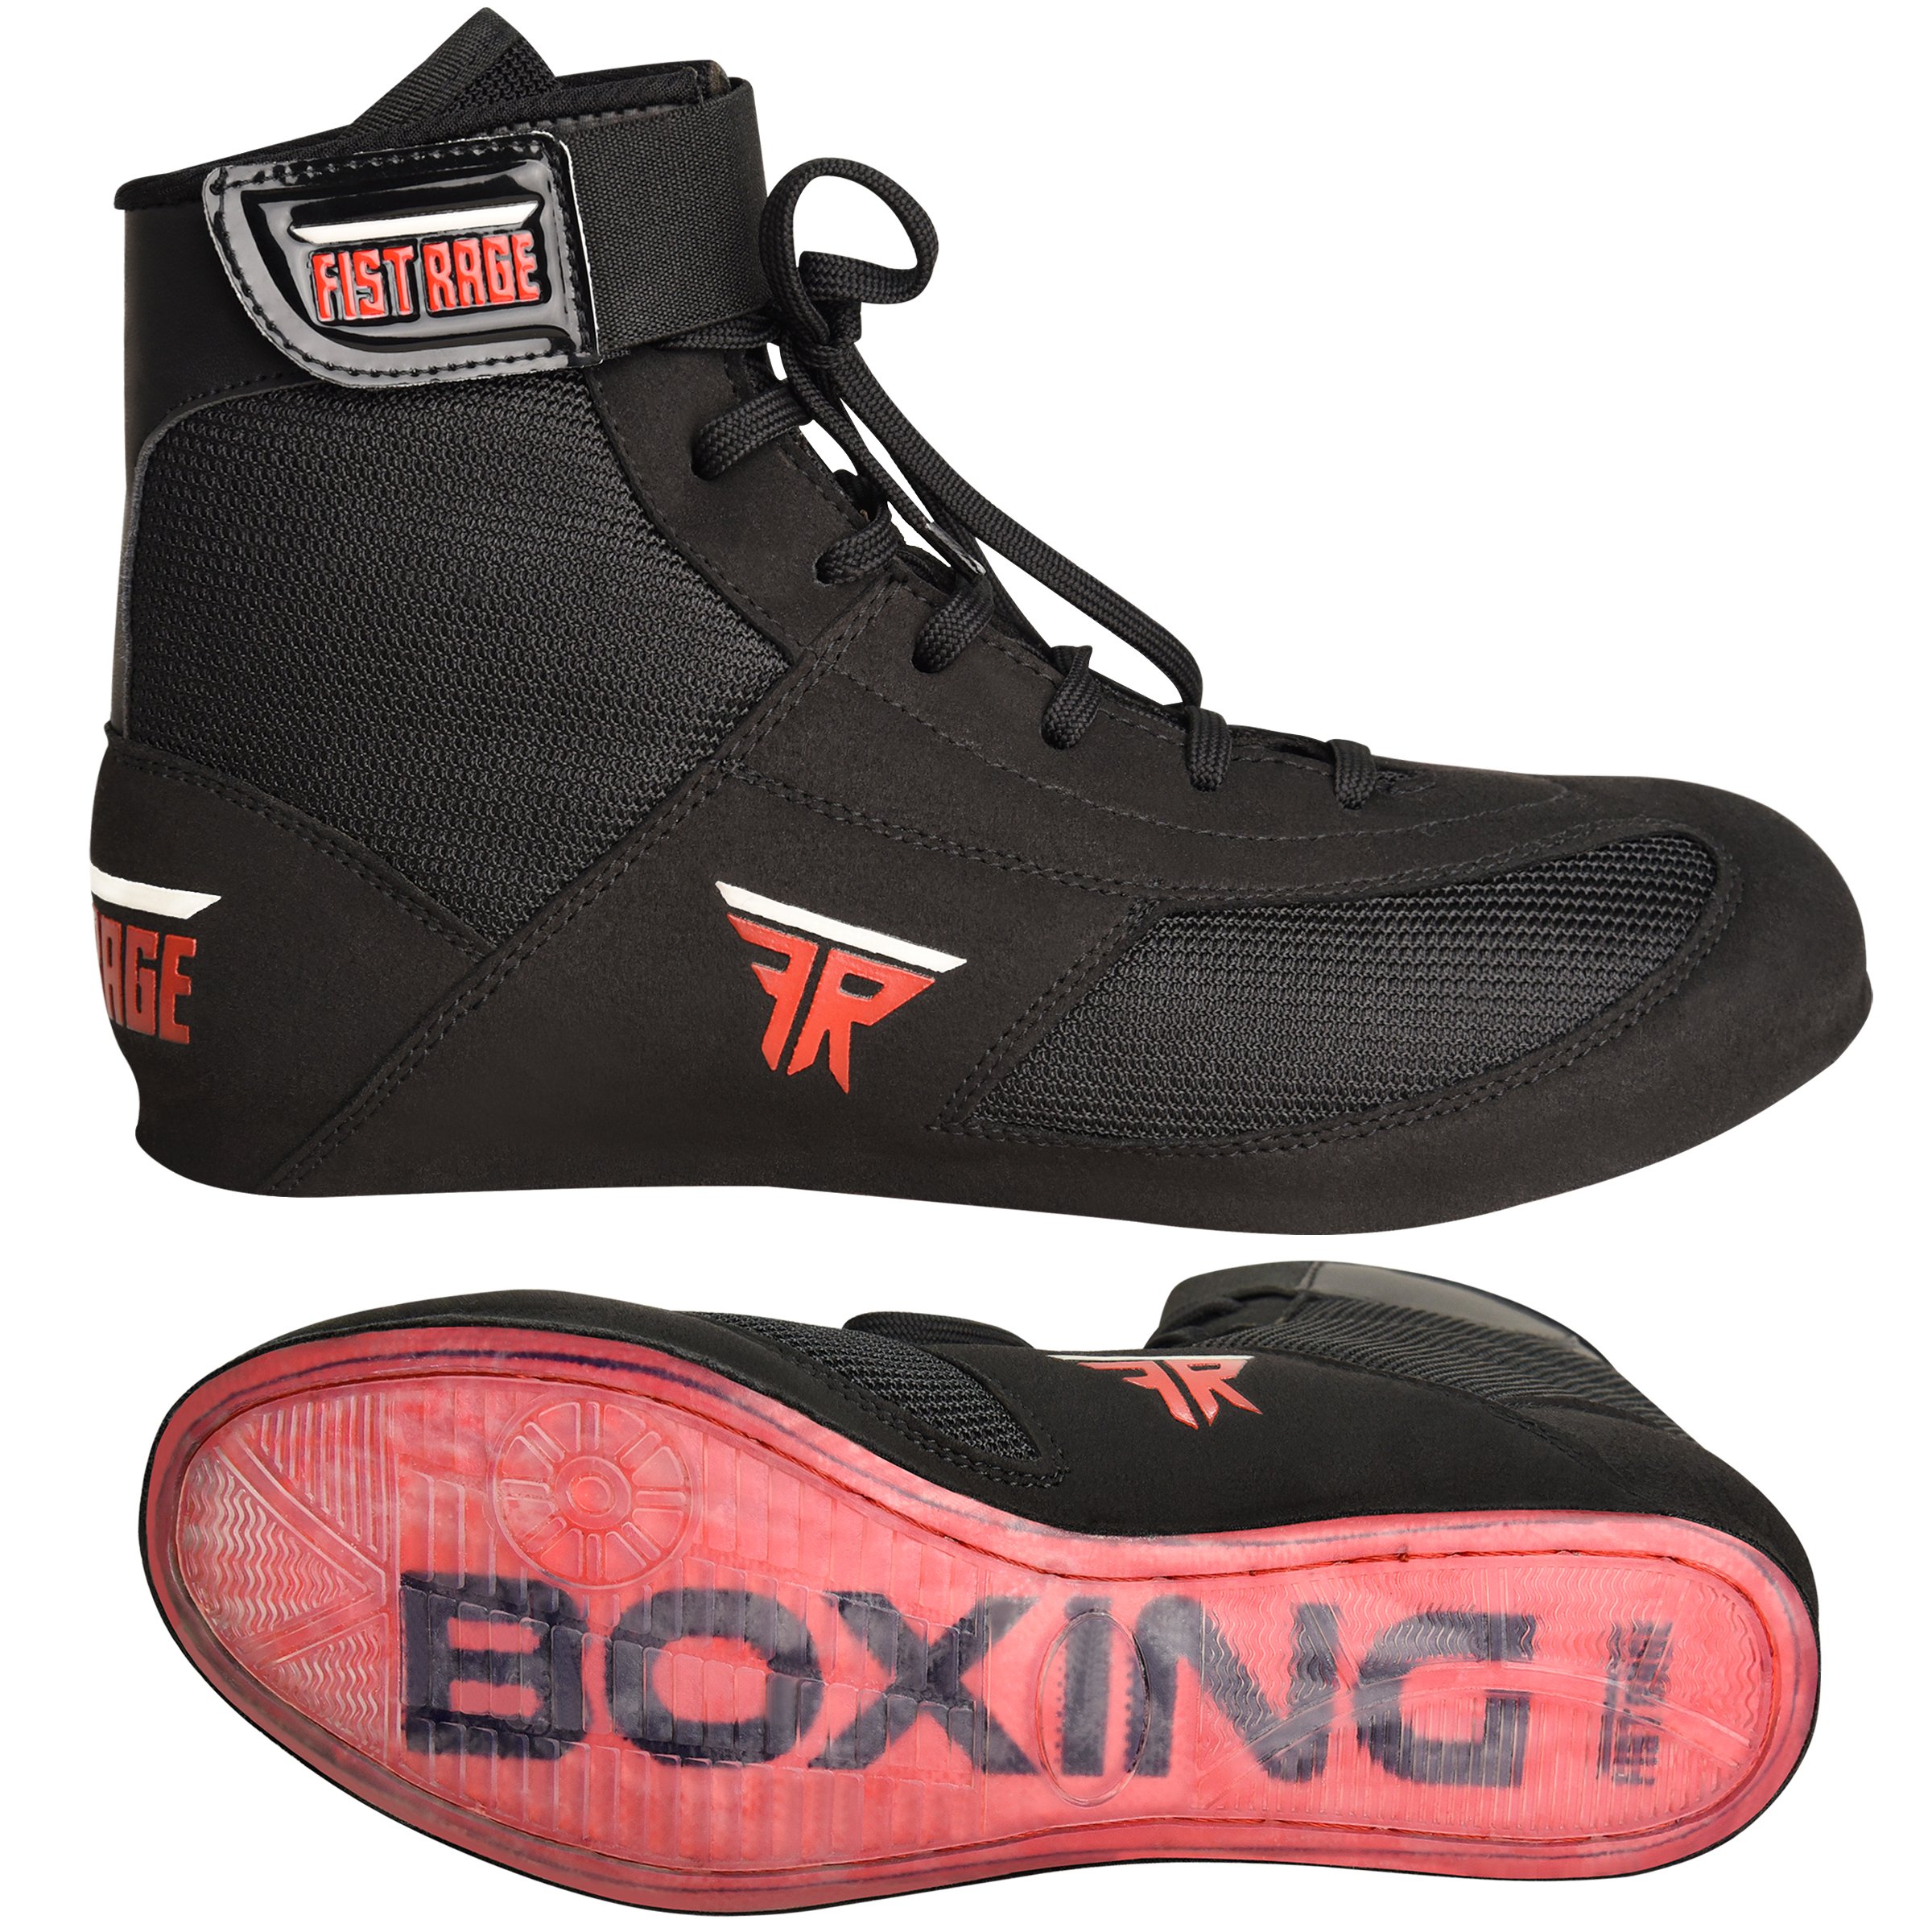 FISTRAGE HALF BOXING SHOES - image 4 of 8